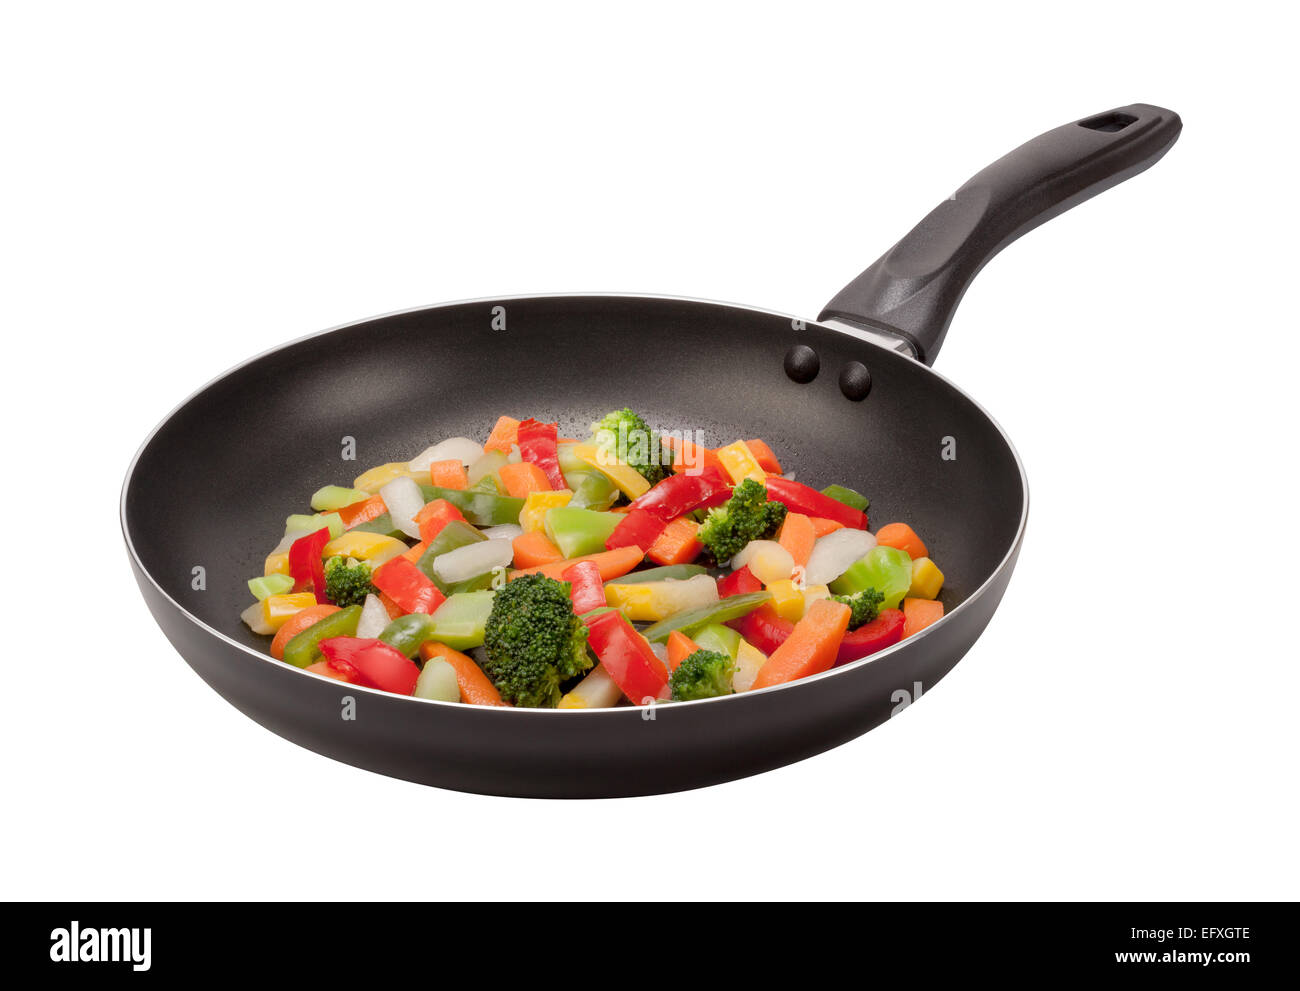 Stir Fry Vegetables in a pan isolated on white. The image is in full focus, front to back. Stock Photo